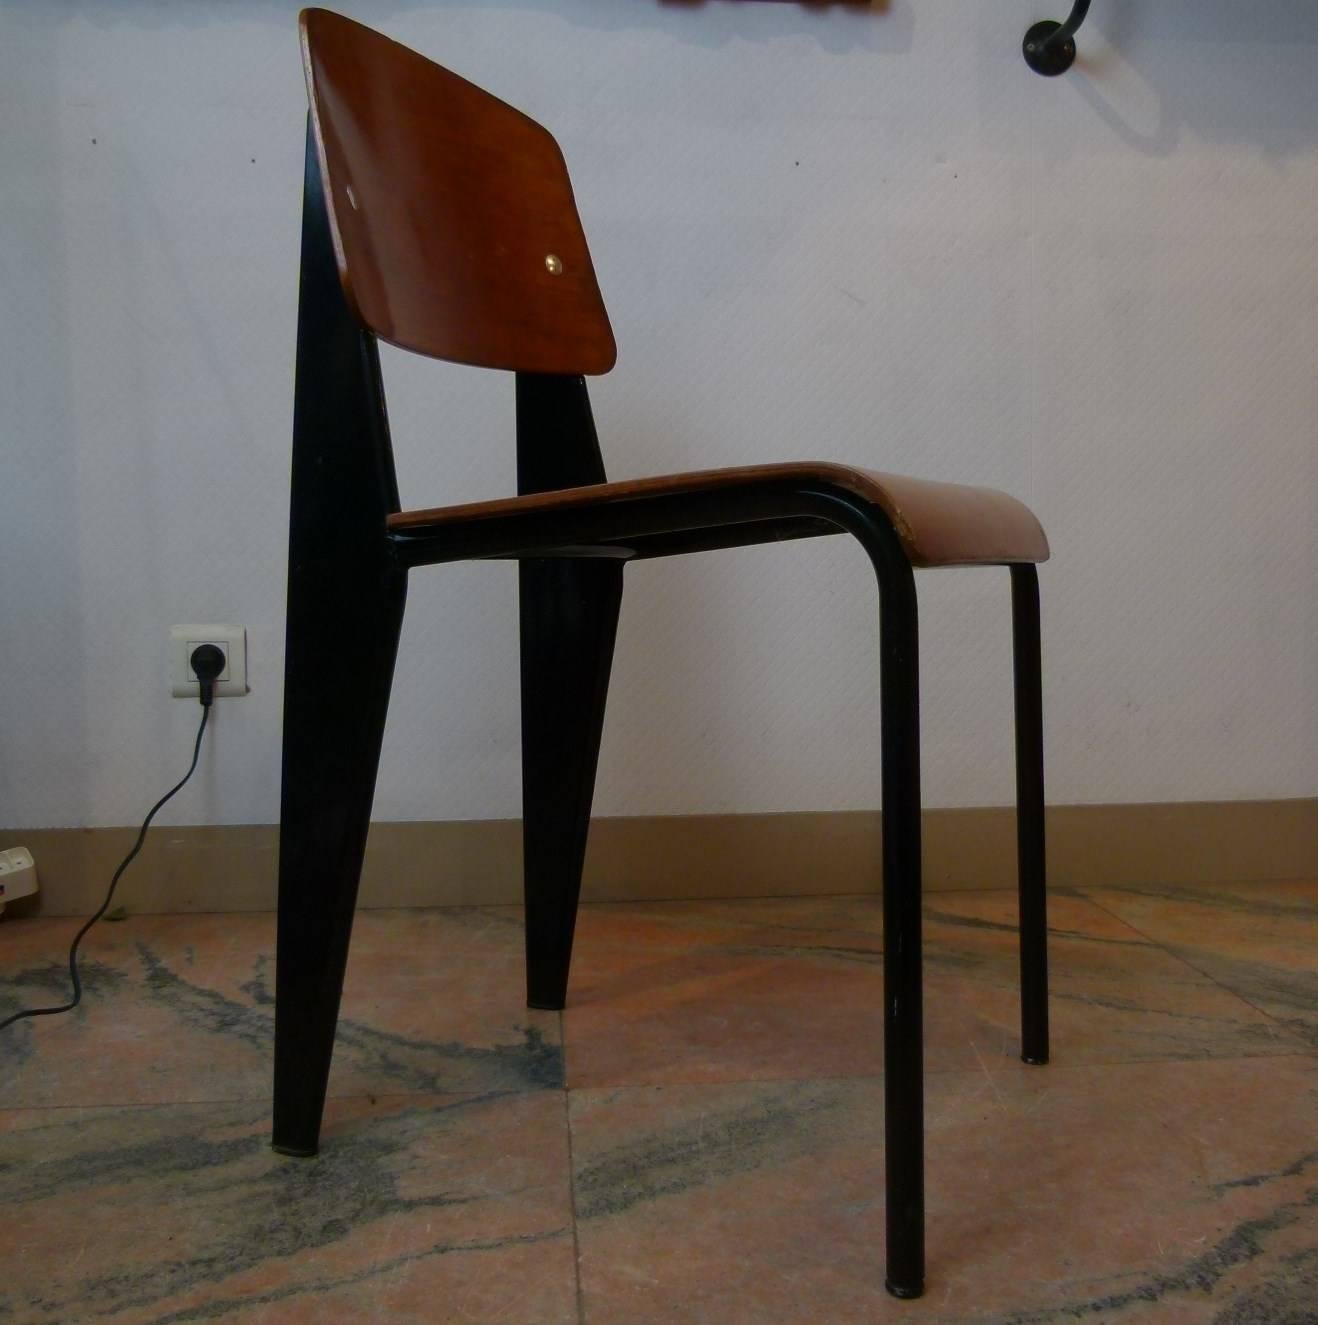 Metropole 305 chair called standard, seat and back in thermoformed beech wood, on a black lacquered folded metal base.
Provenance social security building.
French work of Jean Prouvé, circa 1950.
Model Metropole 305 called Standard.
Good